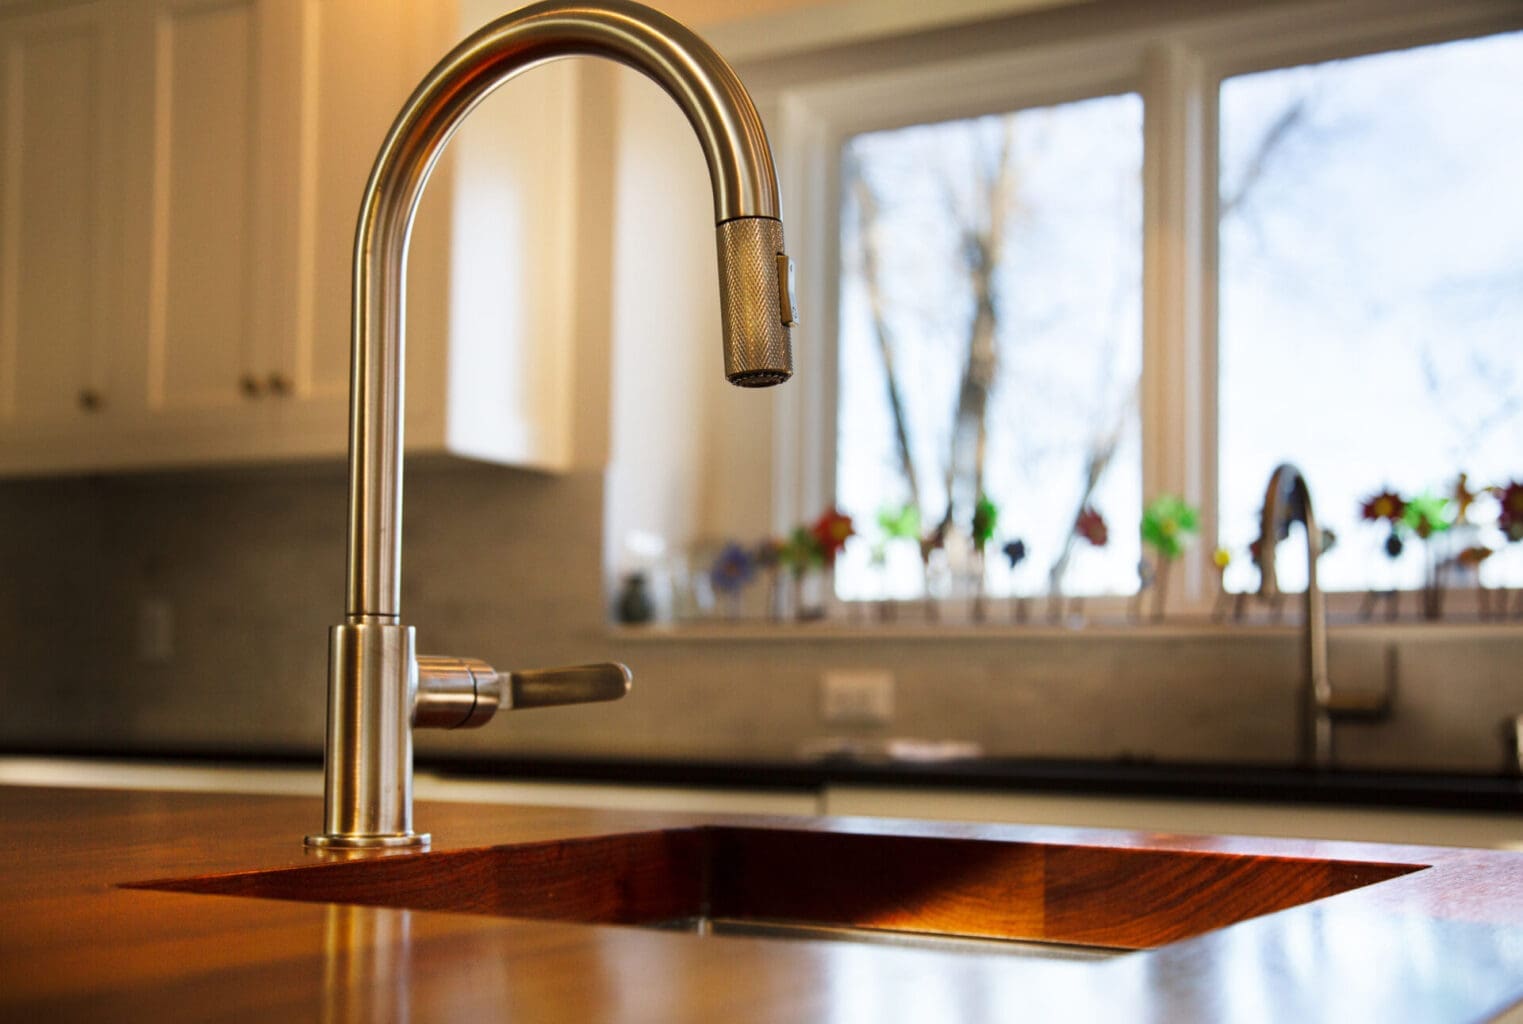 A photo of a stainless steel faucet inlaid on a wooden island.